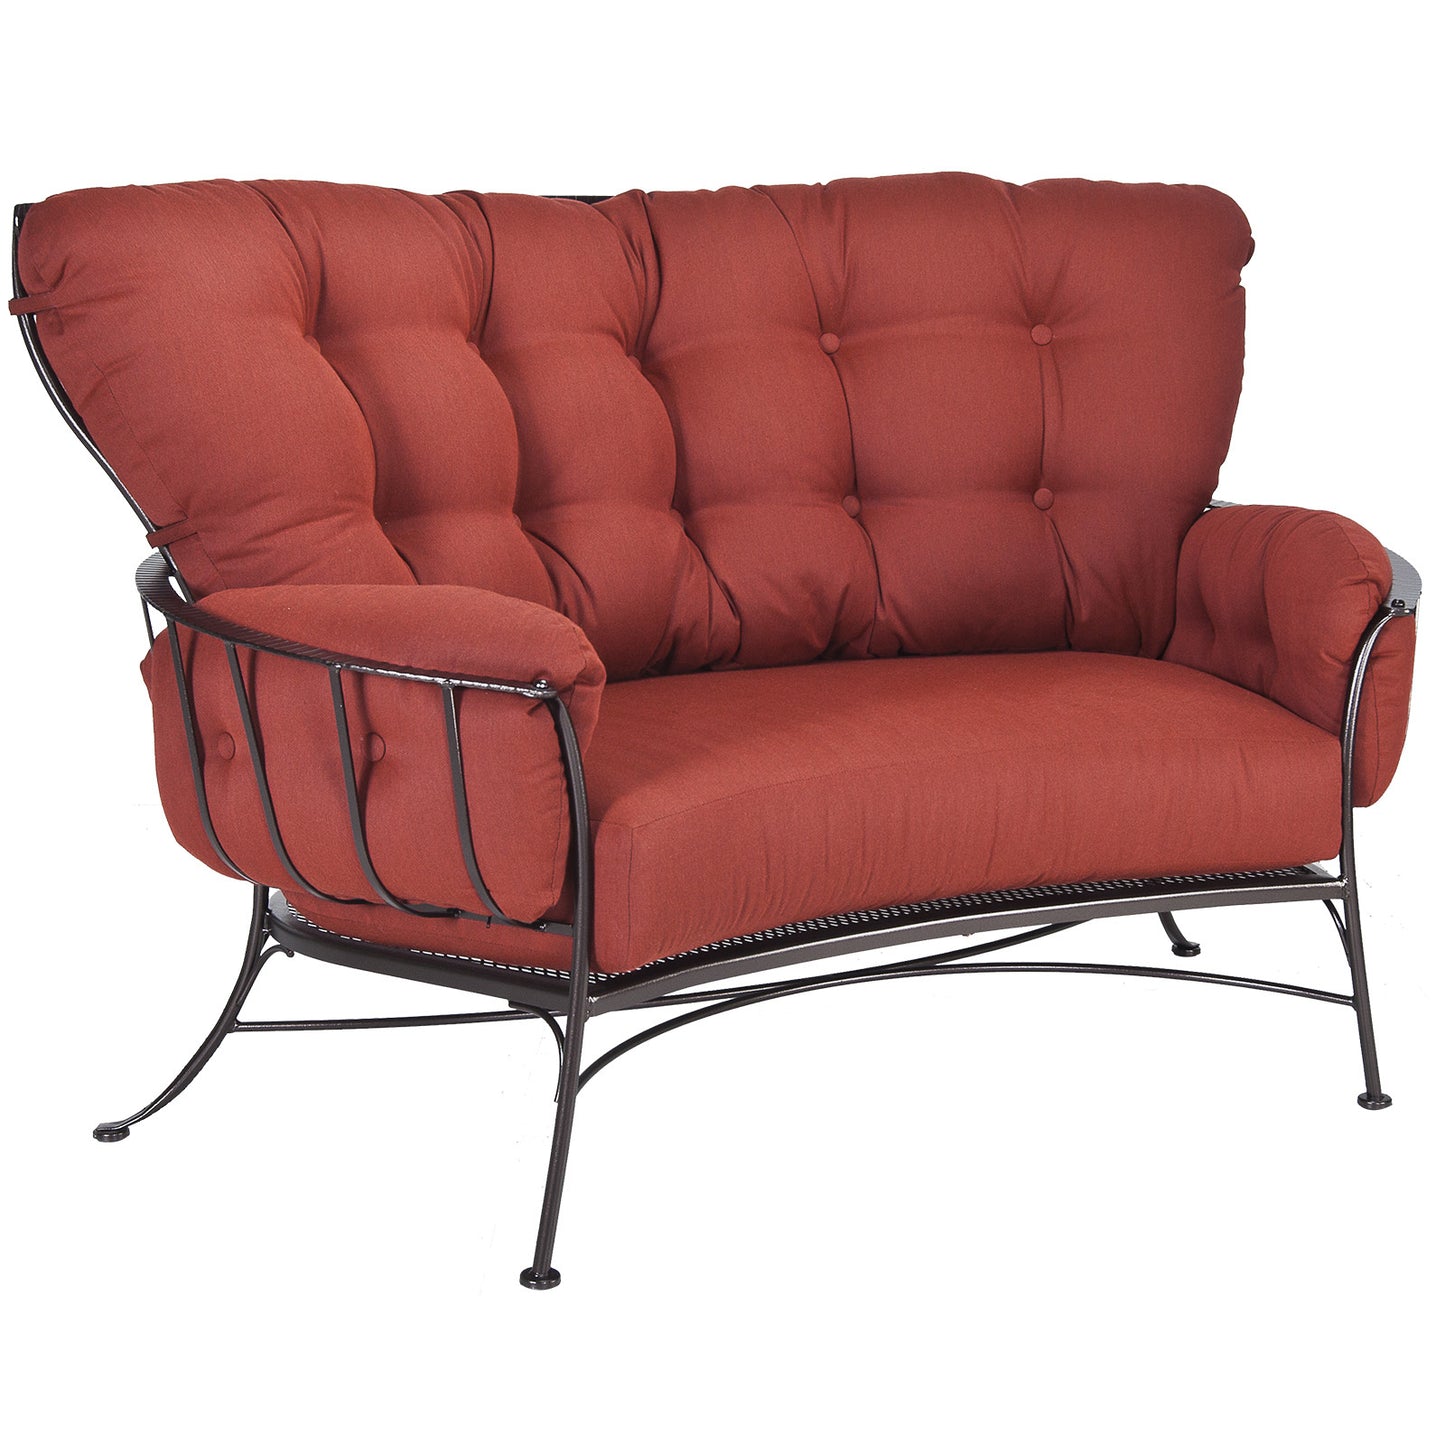 O.W. Lee Monterra Outdoor Patio Crescent Love Seat is available at Jacobs Custom Living.